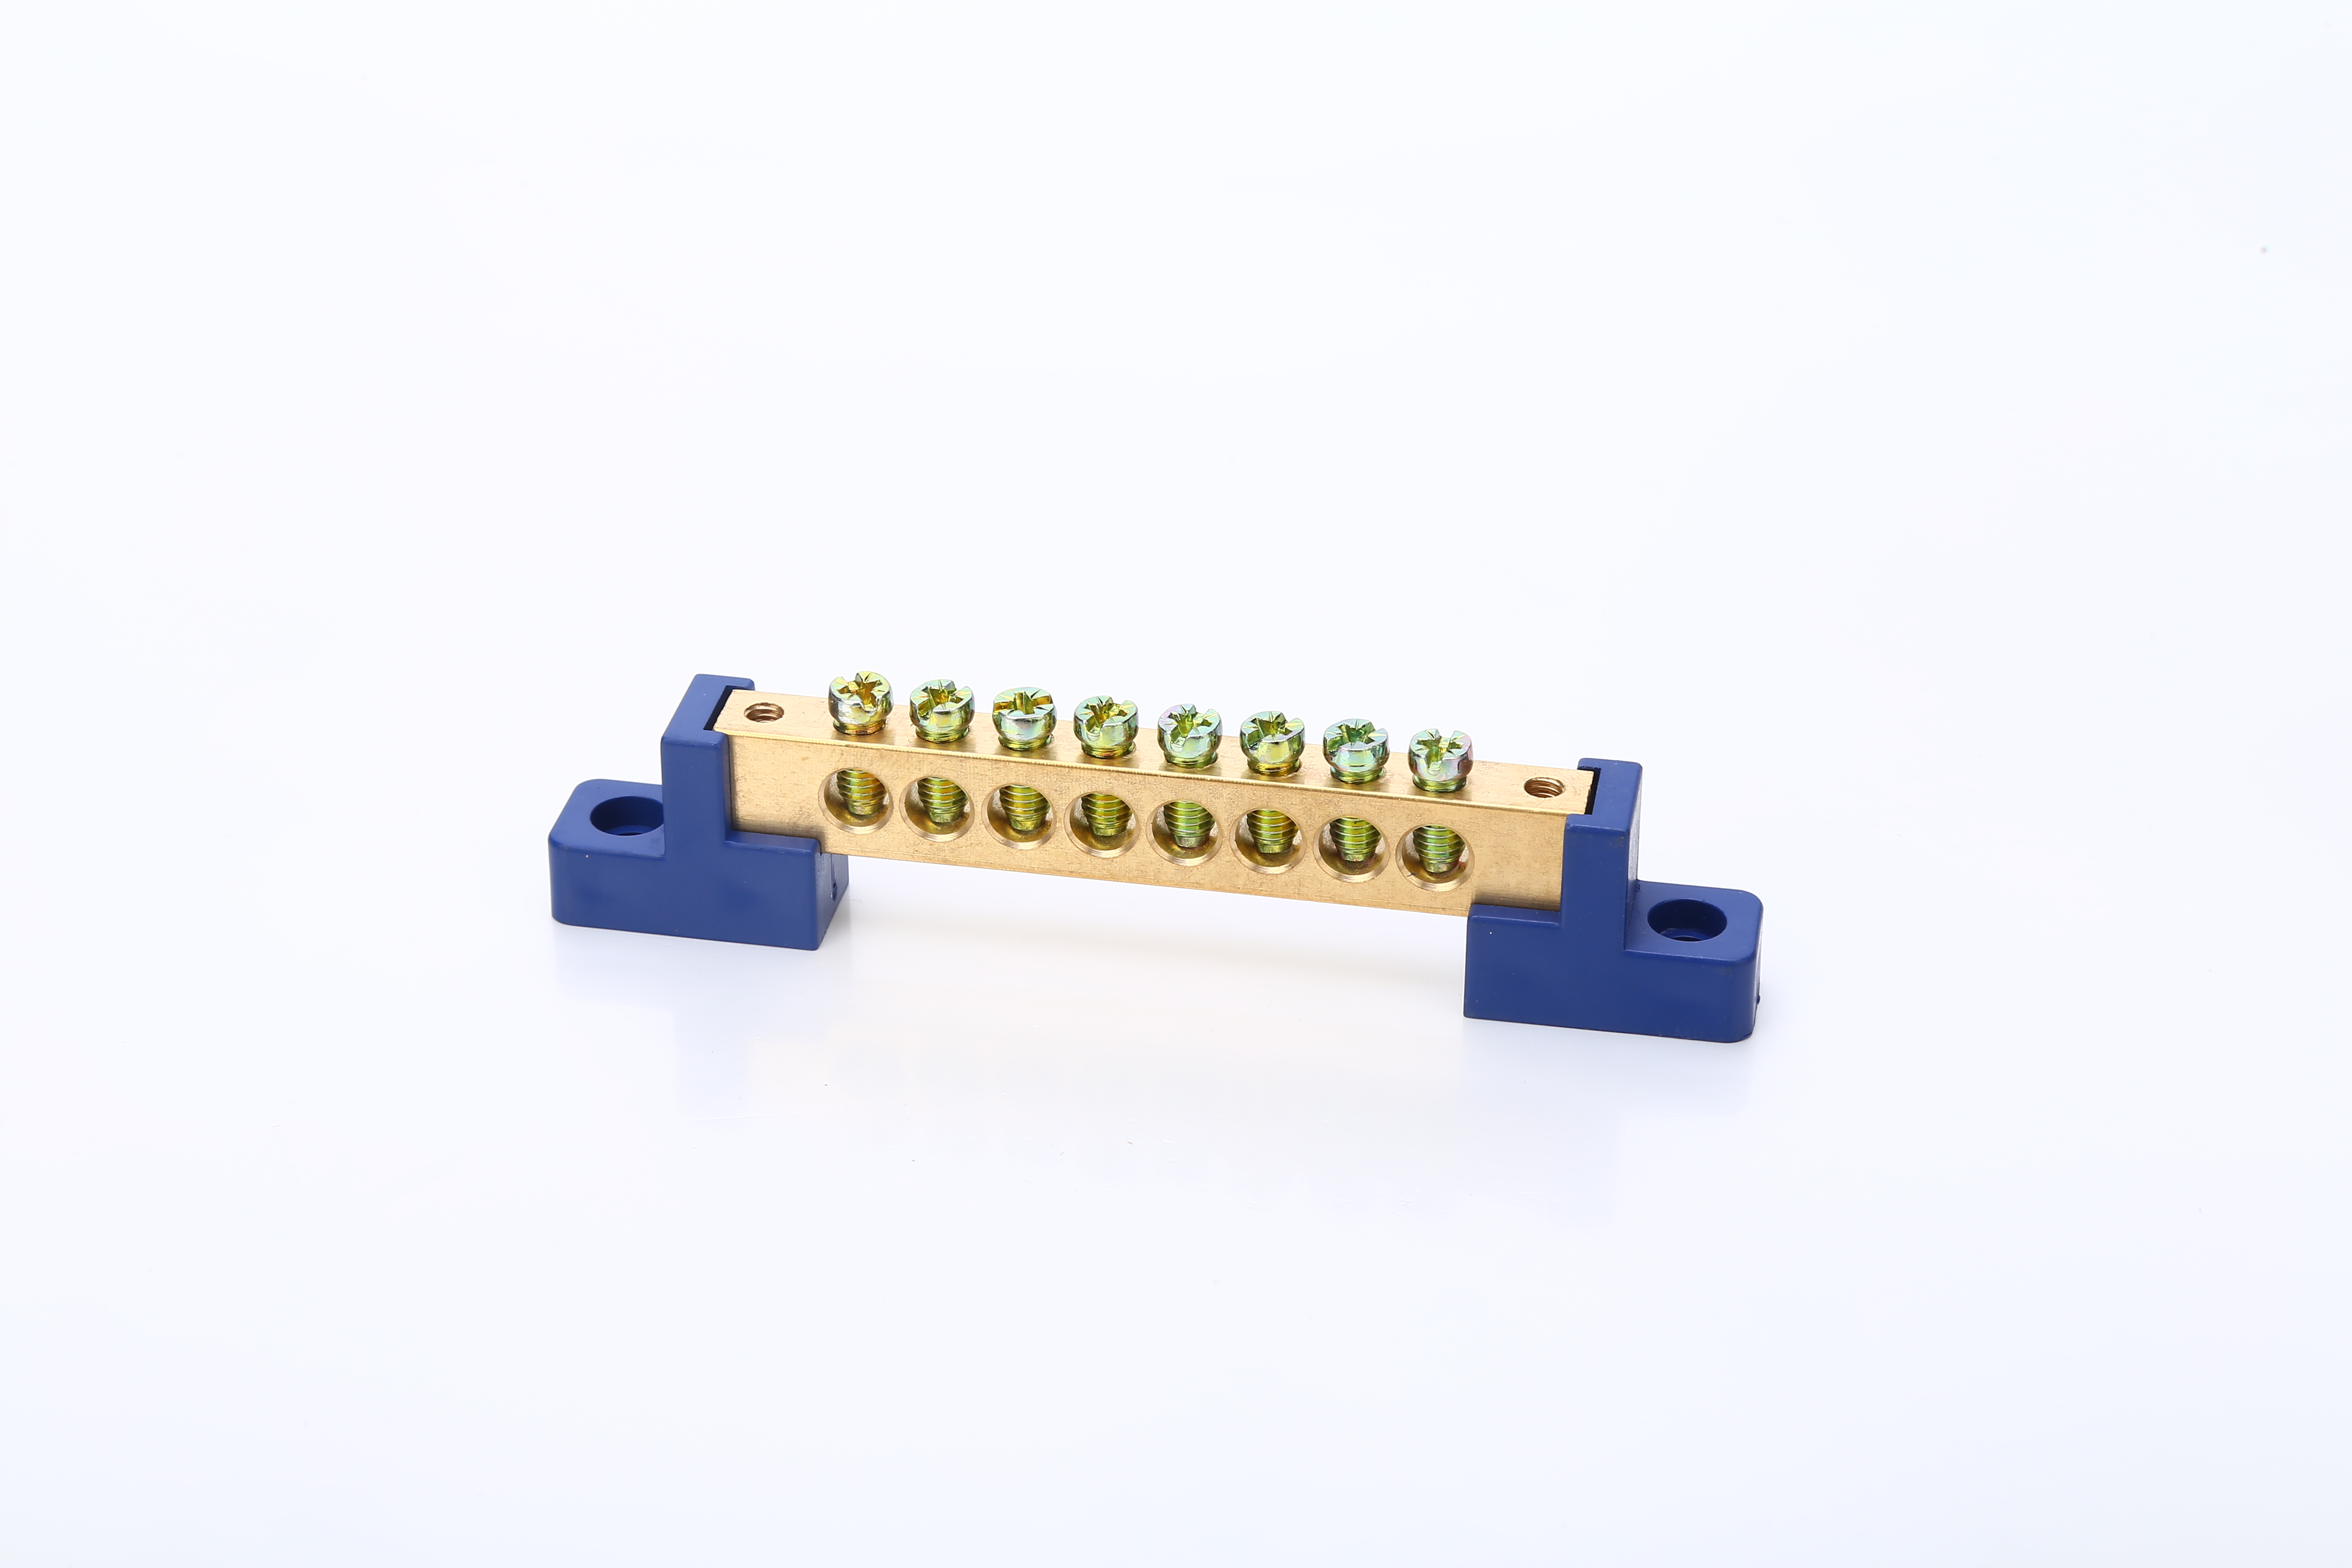 8P Copper Wiring Row Zero Strip Flame Connection Screw Ground Bridge Electrical Hole Dual Neutral Wire Holder Brass Connector Bar